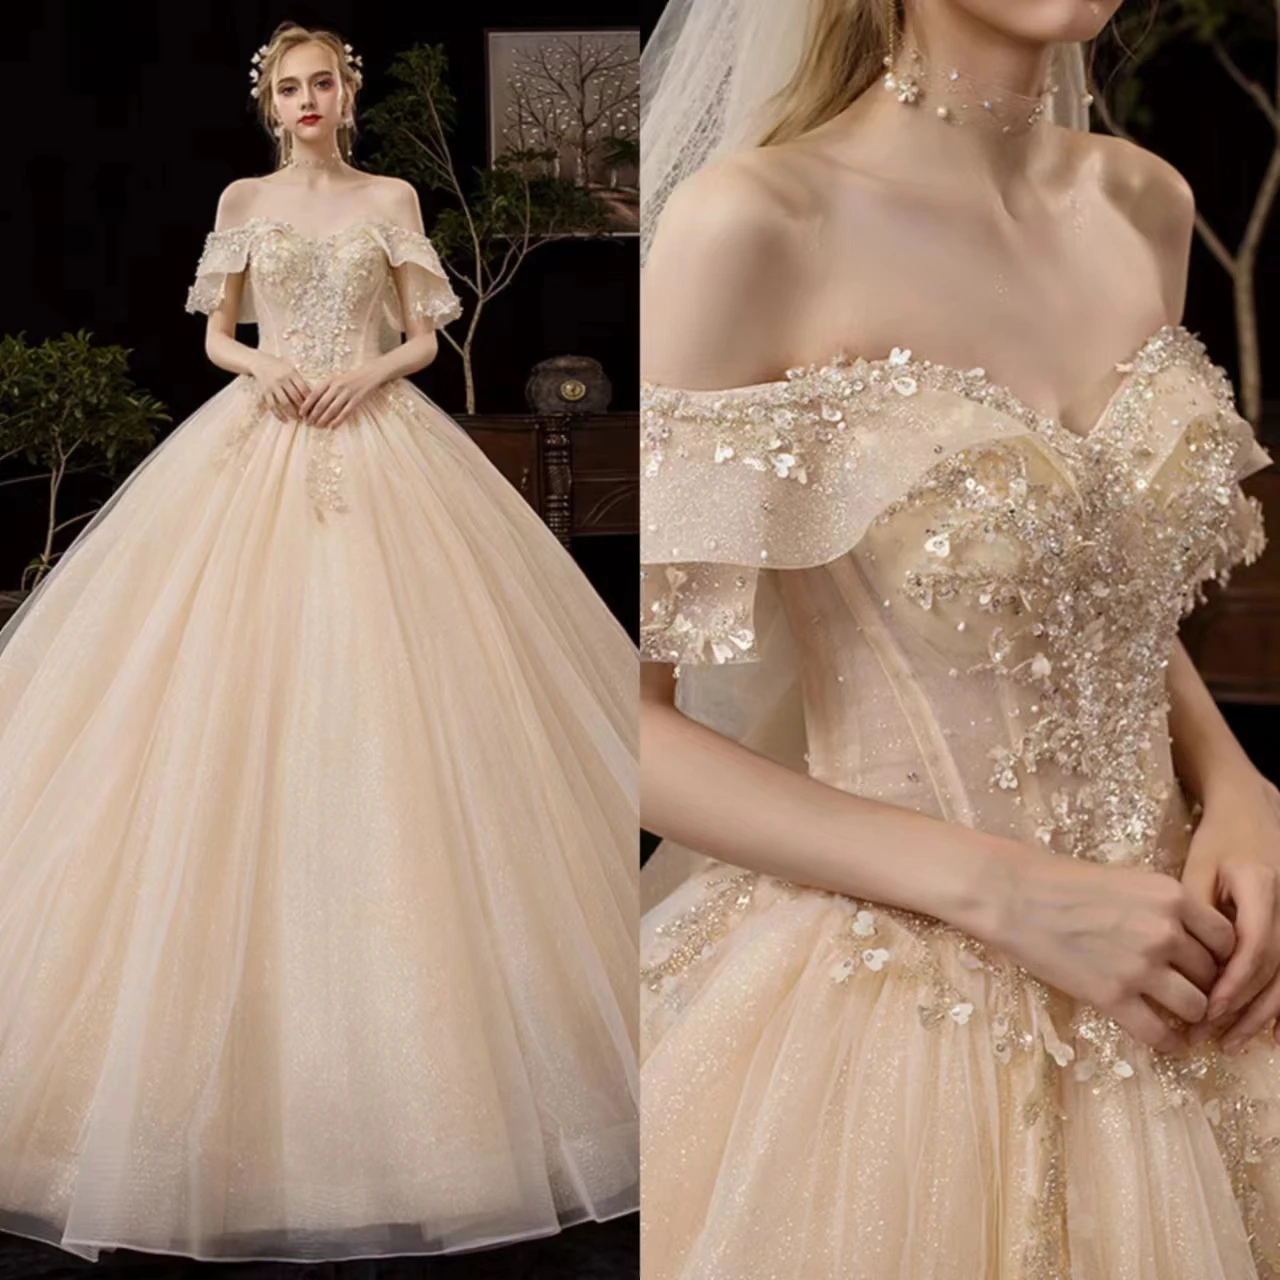 

Delicate A-Line Wedding Dress For Women Sequins Bridal Gown Off-Shoulder Sweetheart Neck Skirt Sweep Train Dresses Custom Made